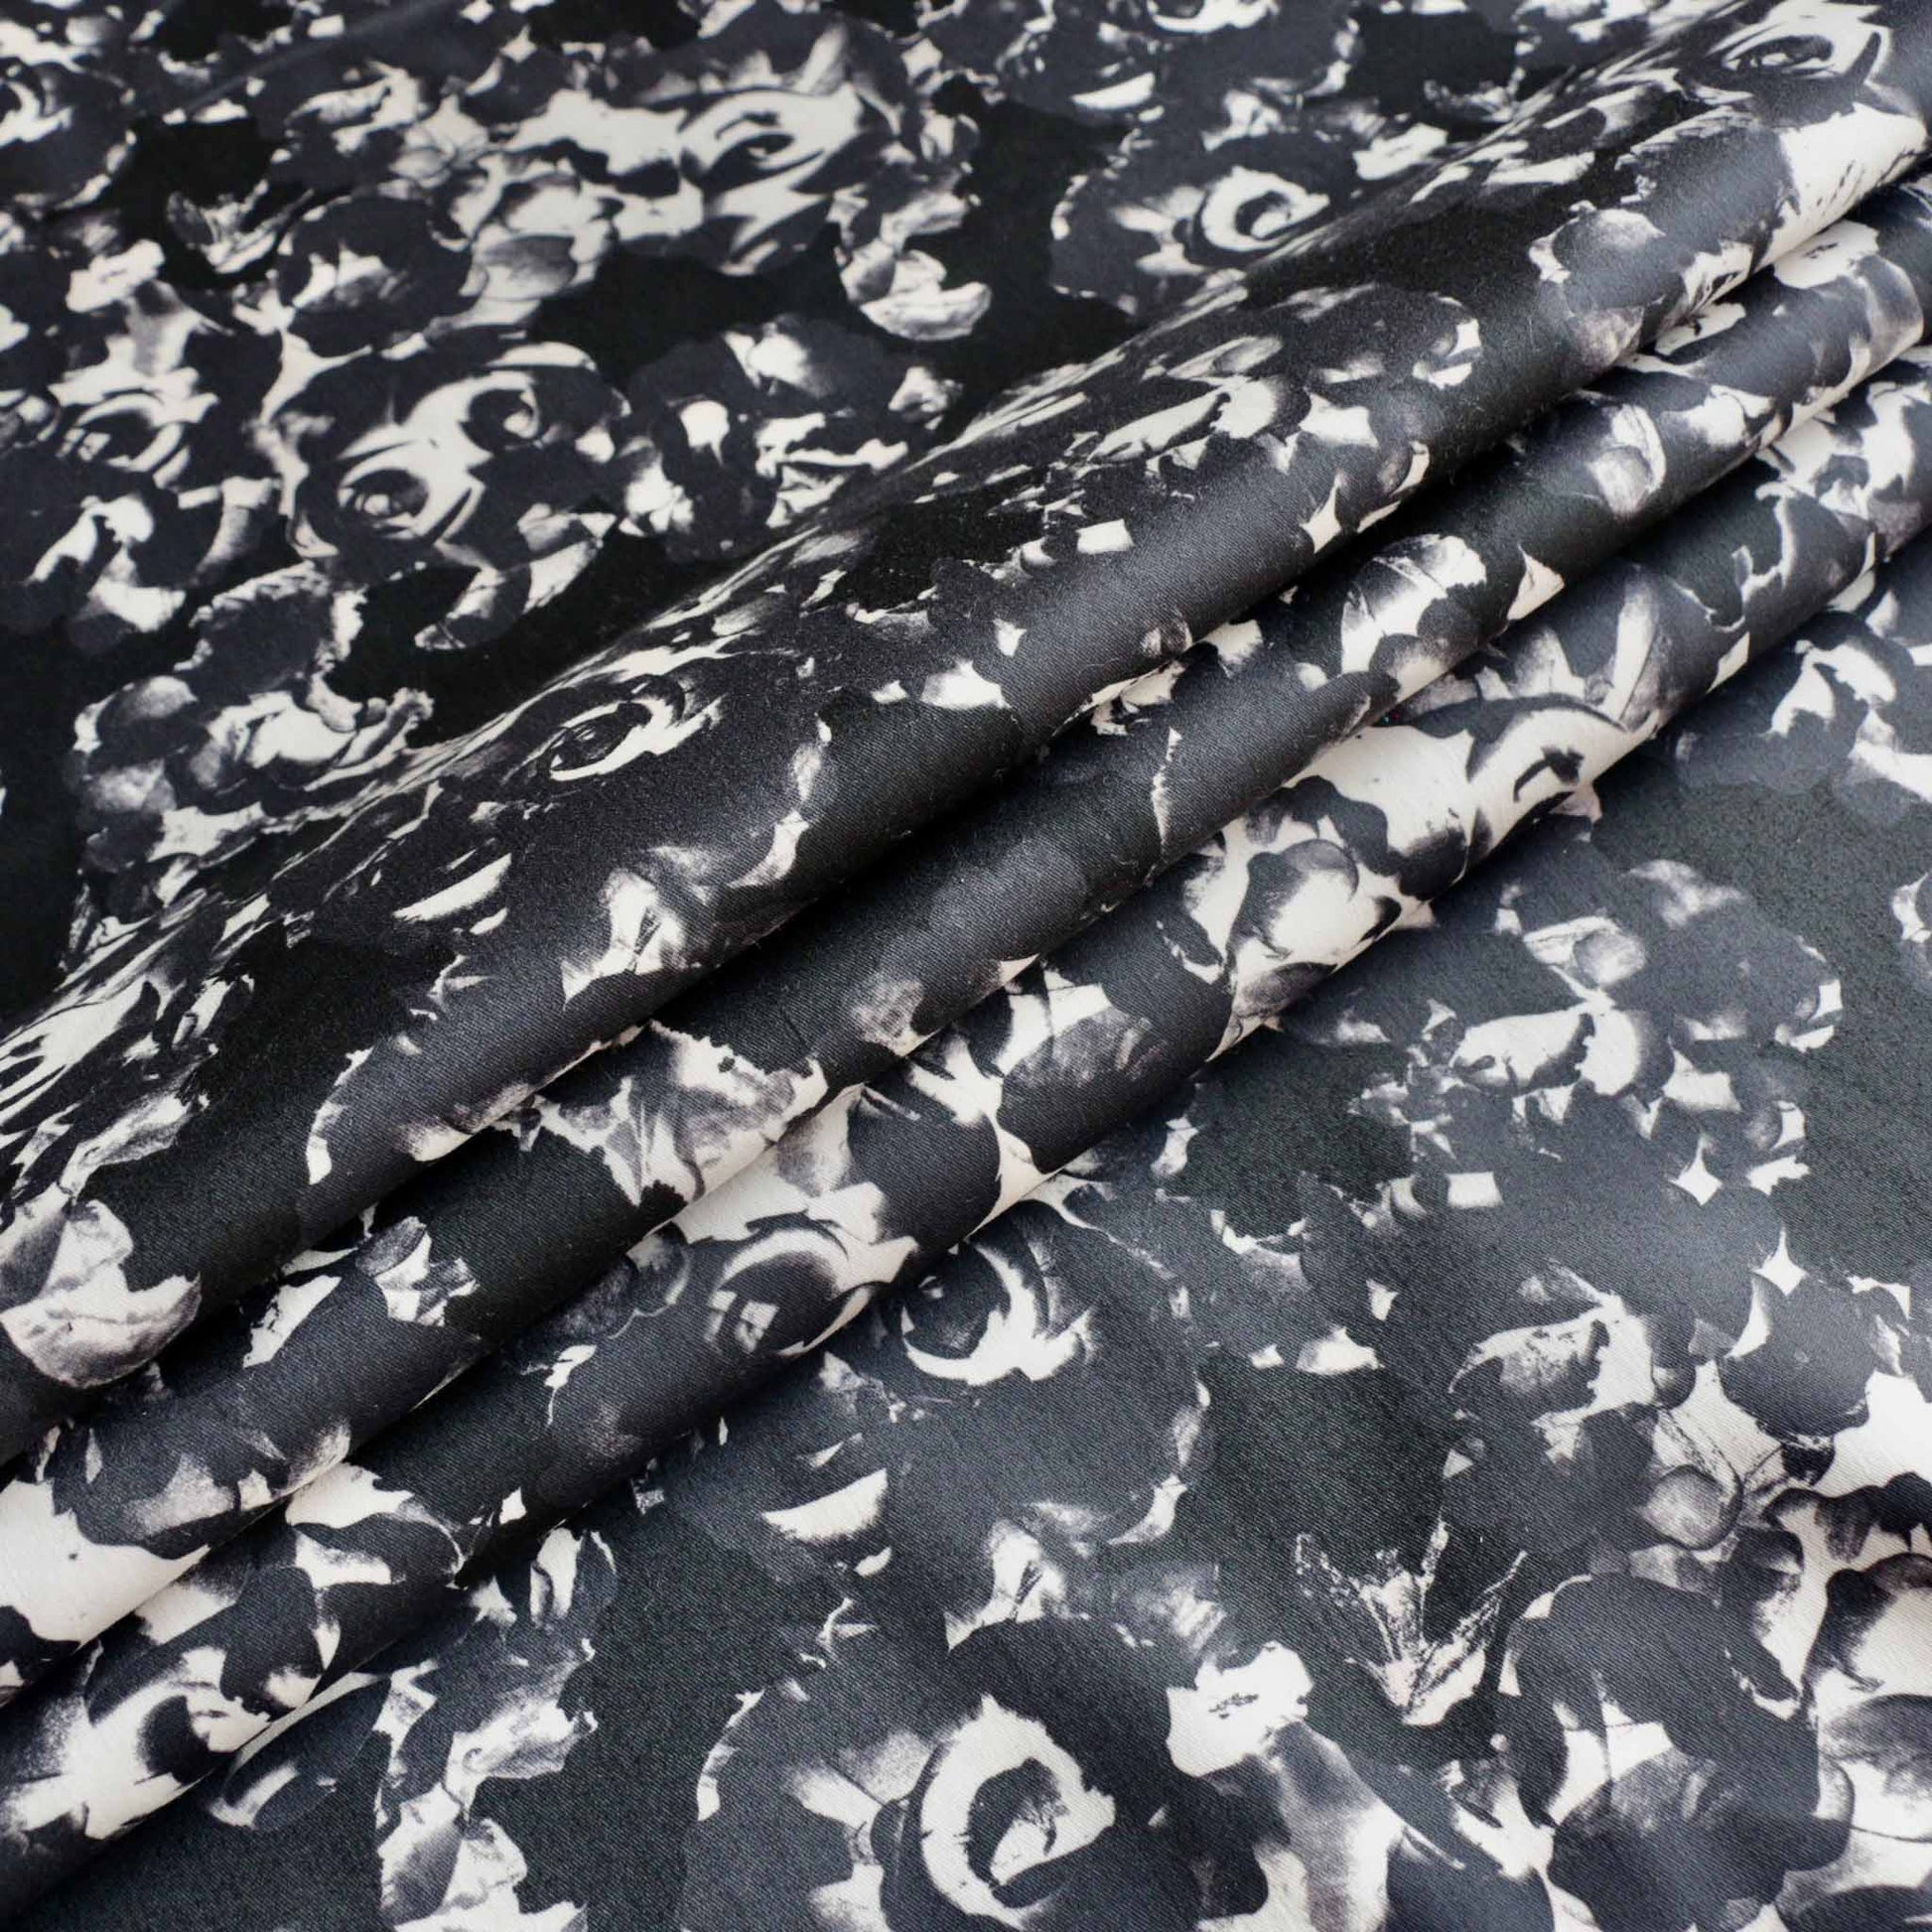 folded stretchy dressmaking cotton sateen fabric in black and grey with floral print design